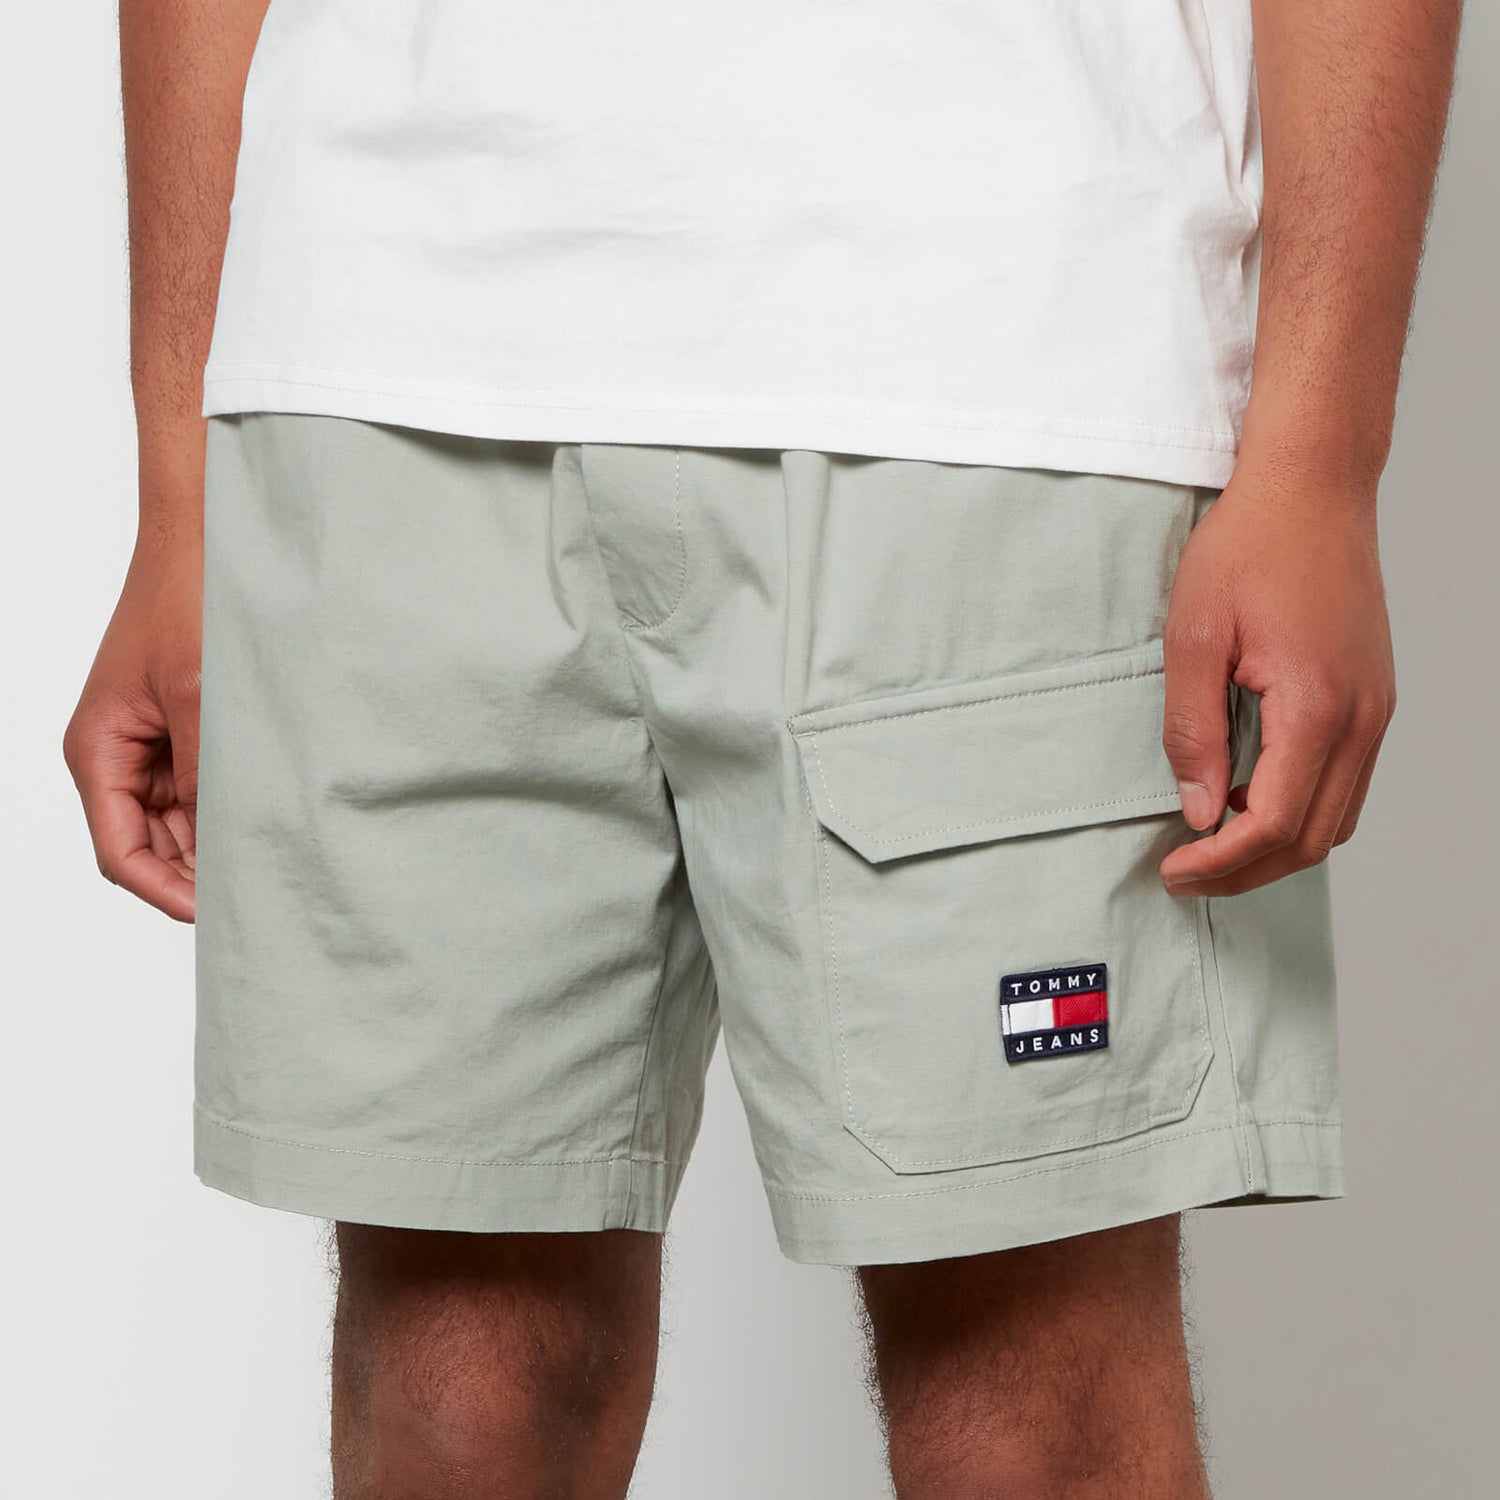 Tommy Jeans Men's Pocket Beach Shorts - Faded Willow - S